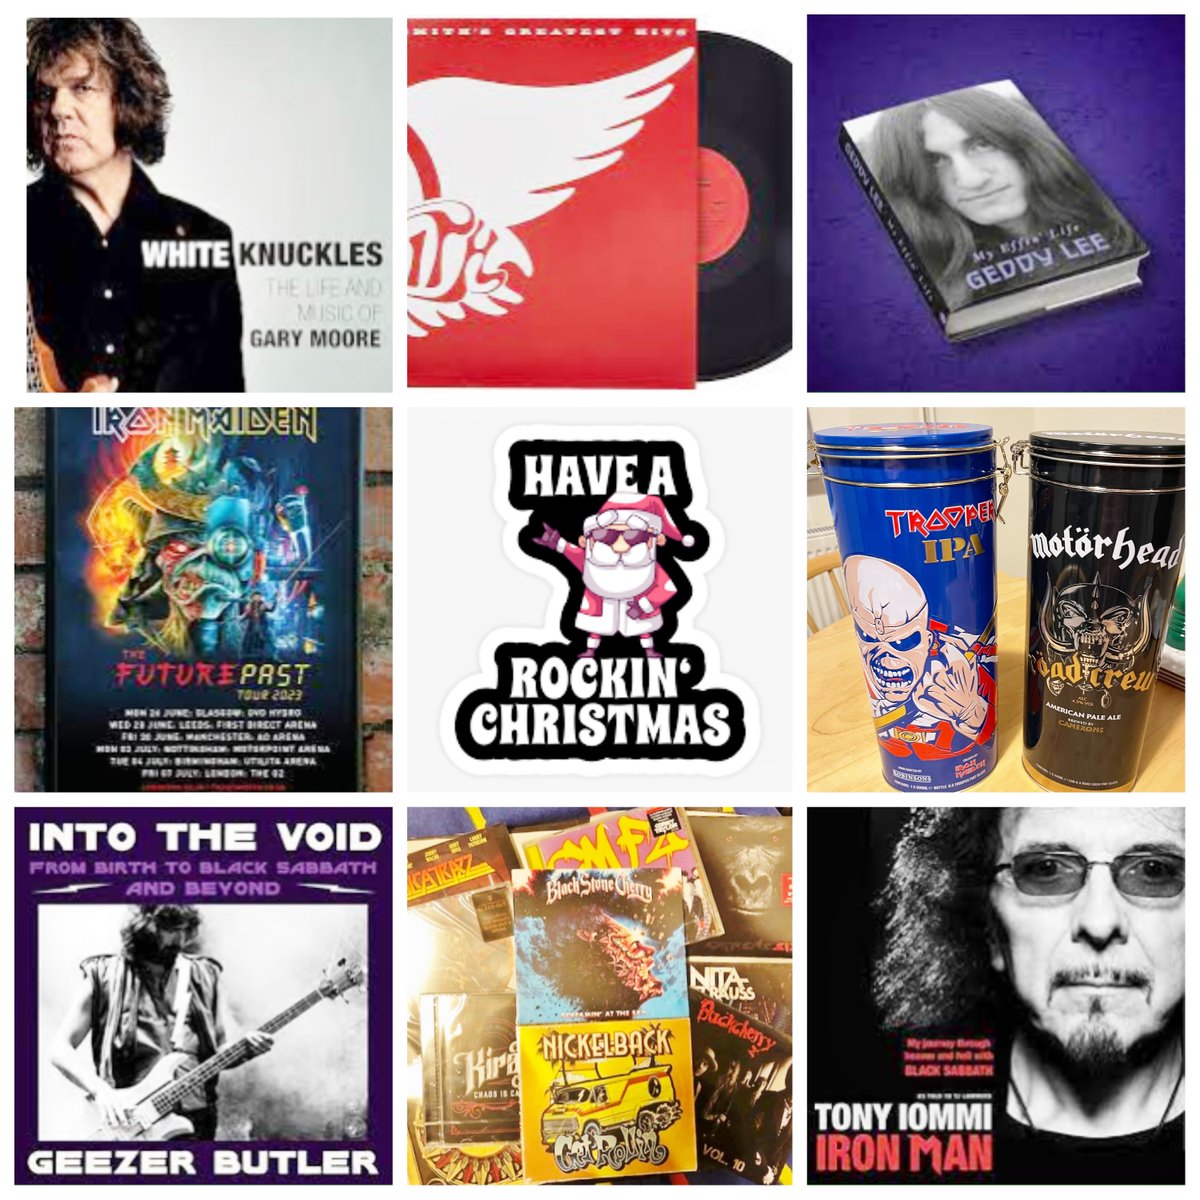 This weeks Thurs rockshow 9-12pm @gtfm_radio
@BCfmRadio @rockradiocom Fri #breezefm.This week It’s our Christmas Rockshow, with festive rock tunes, season’s greetings from the stars, and the annual ‘12 Prizes For  Xmas’ competition to win Vinyl albums, CDs, Books, and more !